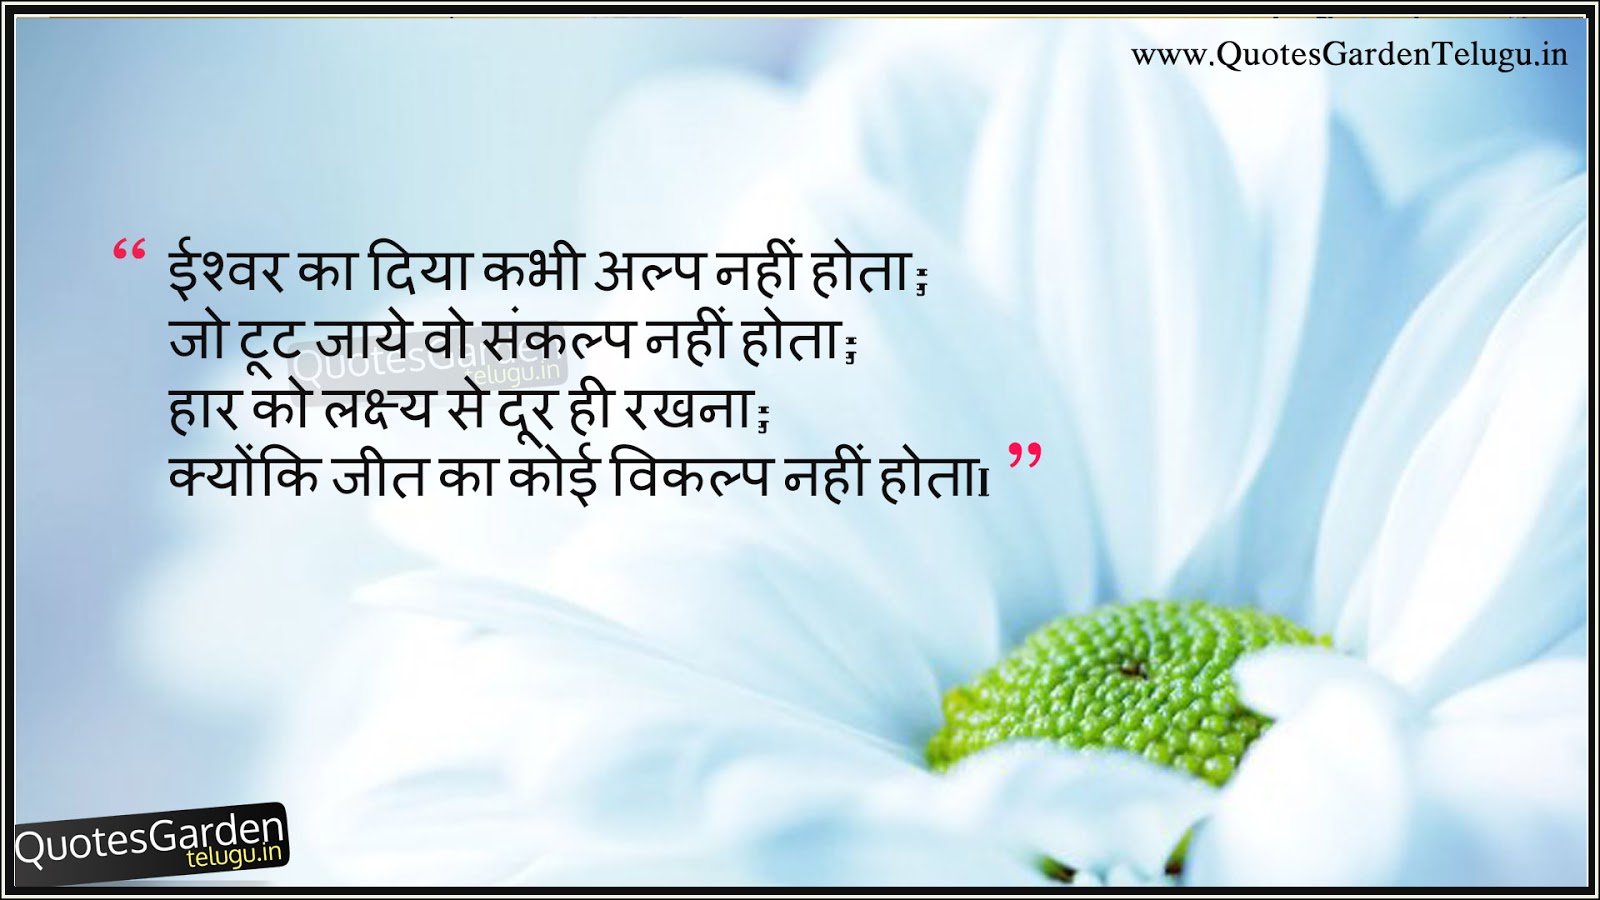 Heart touching life quotes in hindi | QUOTES GARDEN TELUGU ...